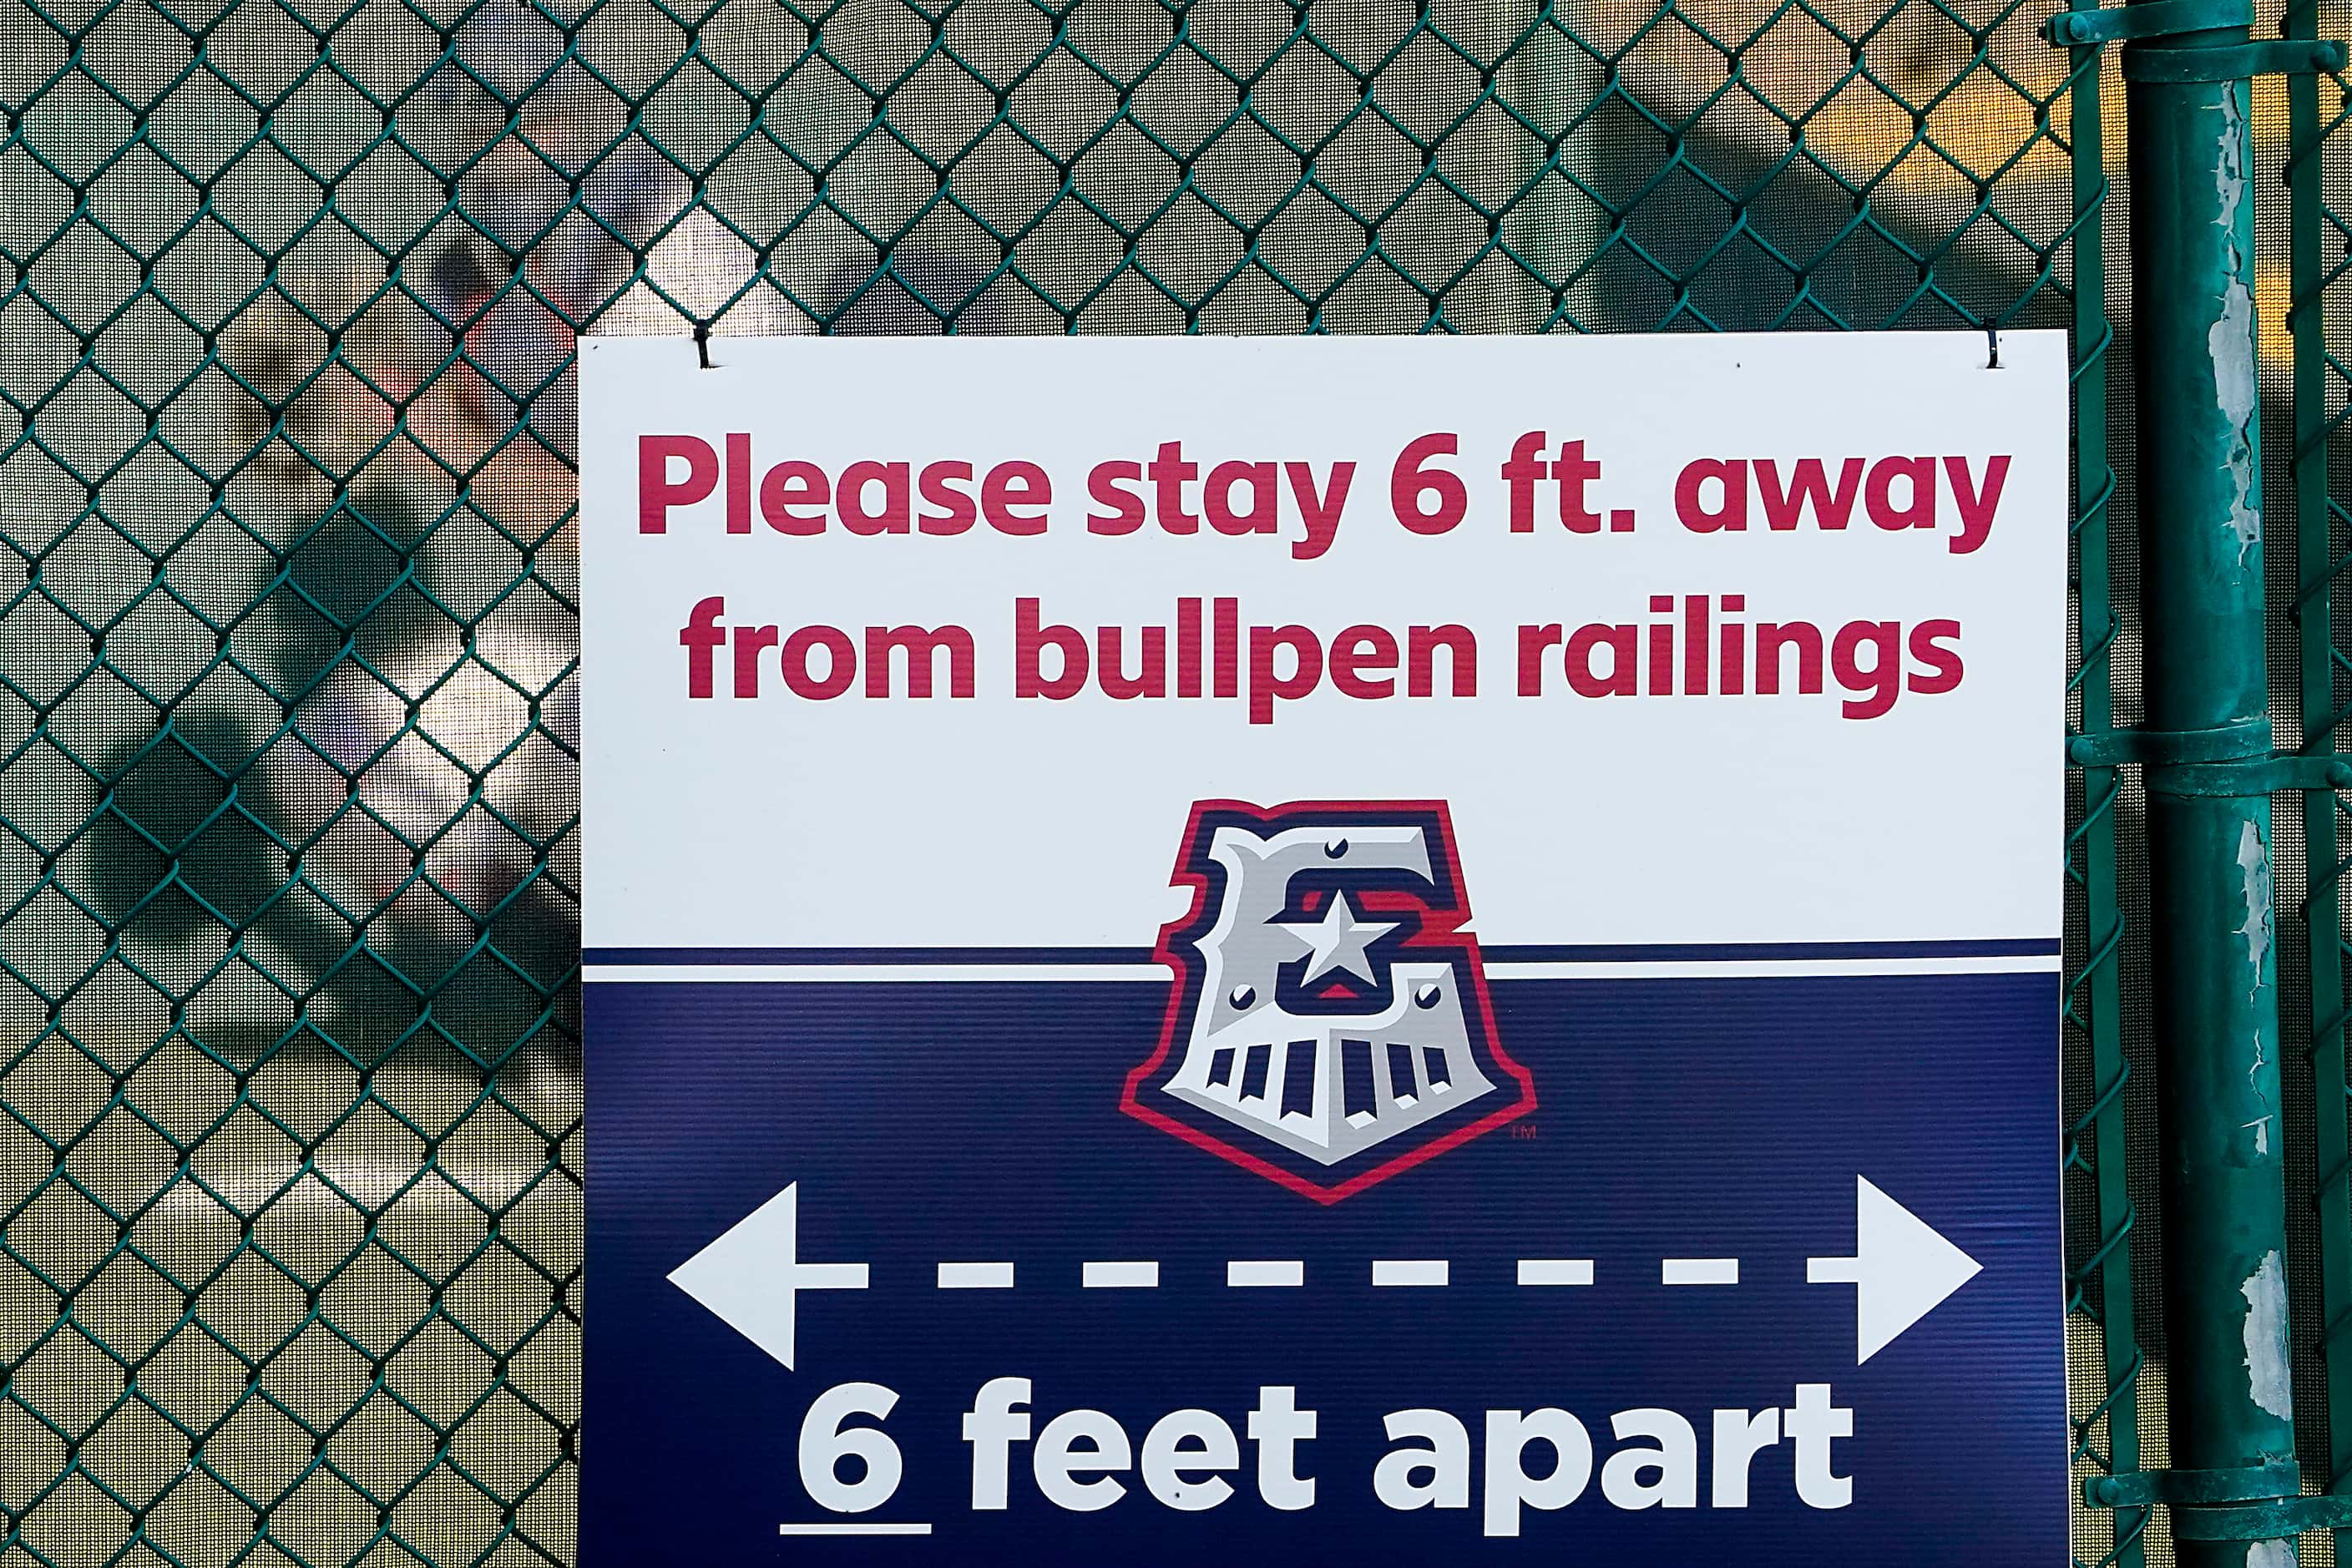 Signs at Dell Diamond encourage fans to keep social distancing from the bullpen before the...